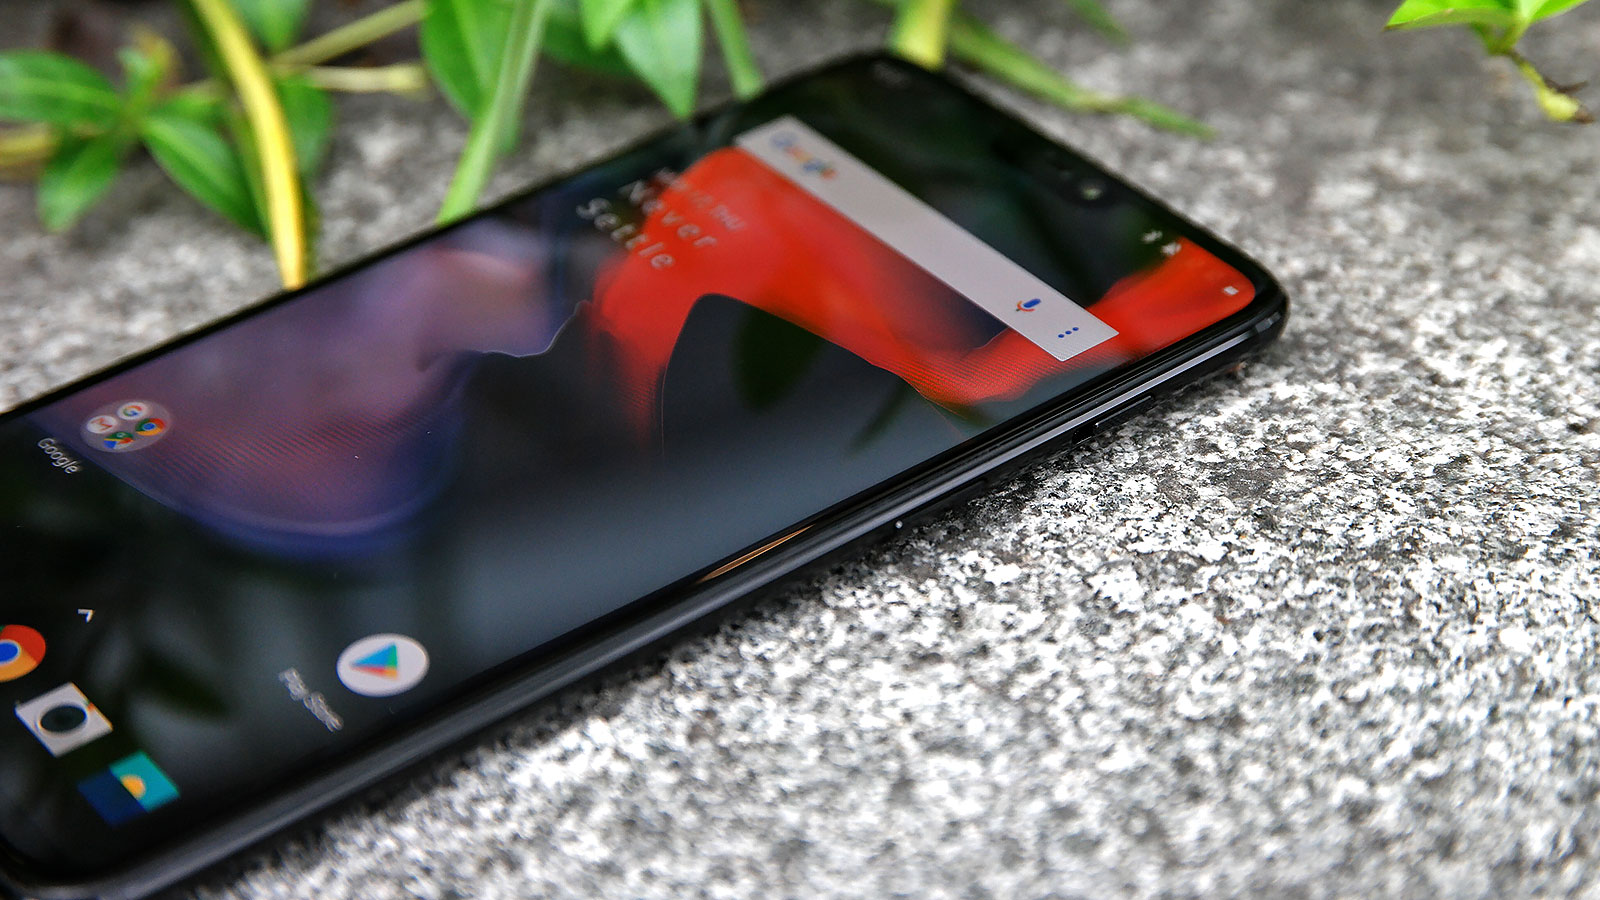 OnePlus 6 Review: The Best Android Phone That Won’t Destroy Your Finances